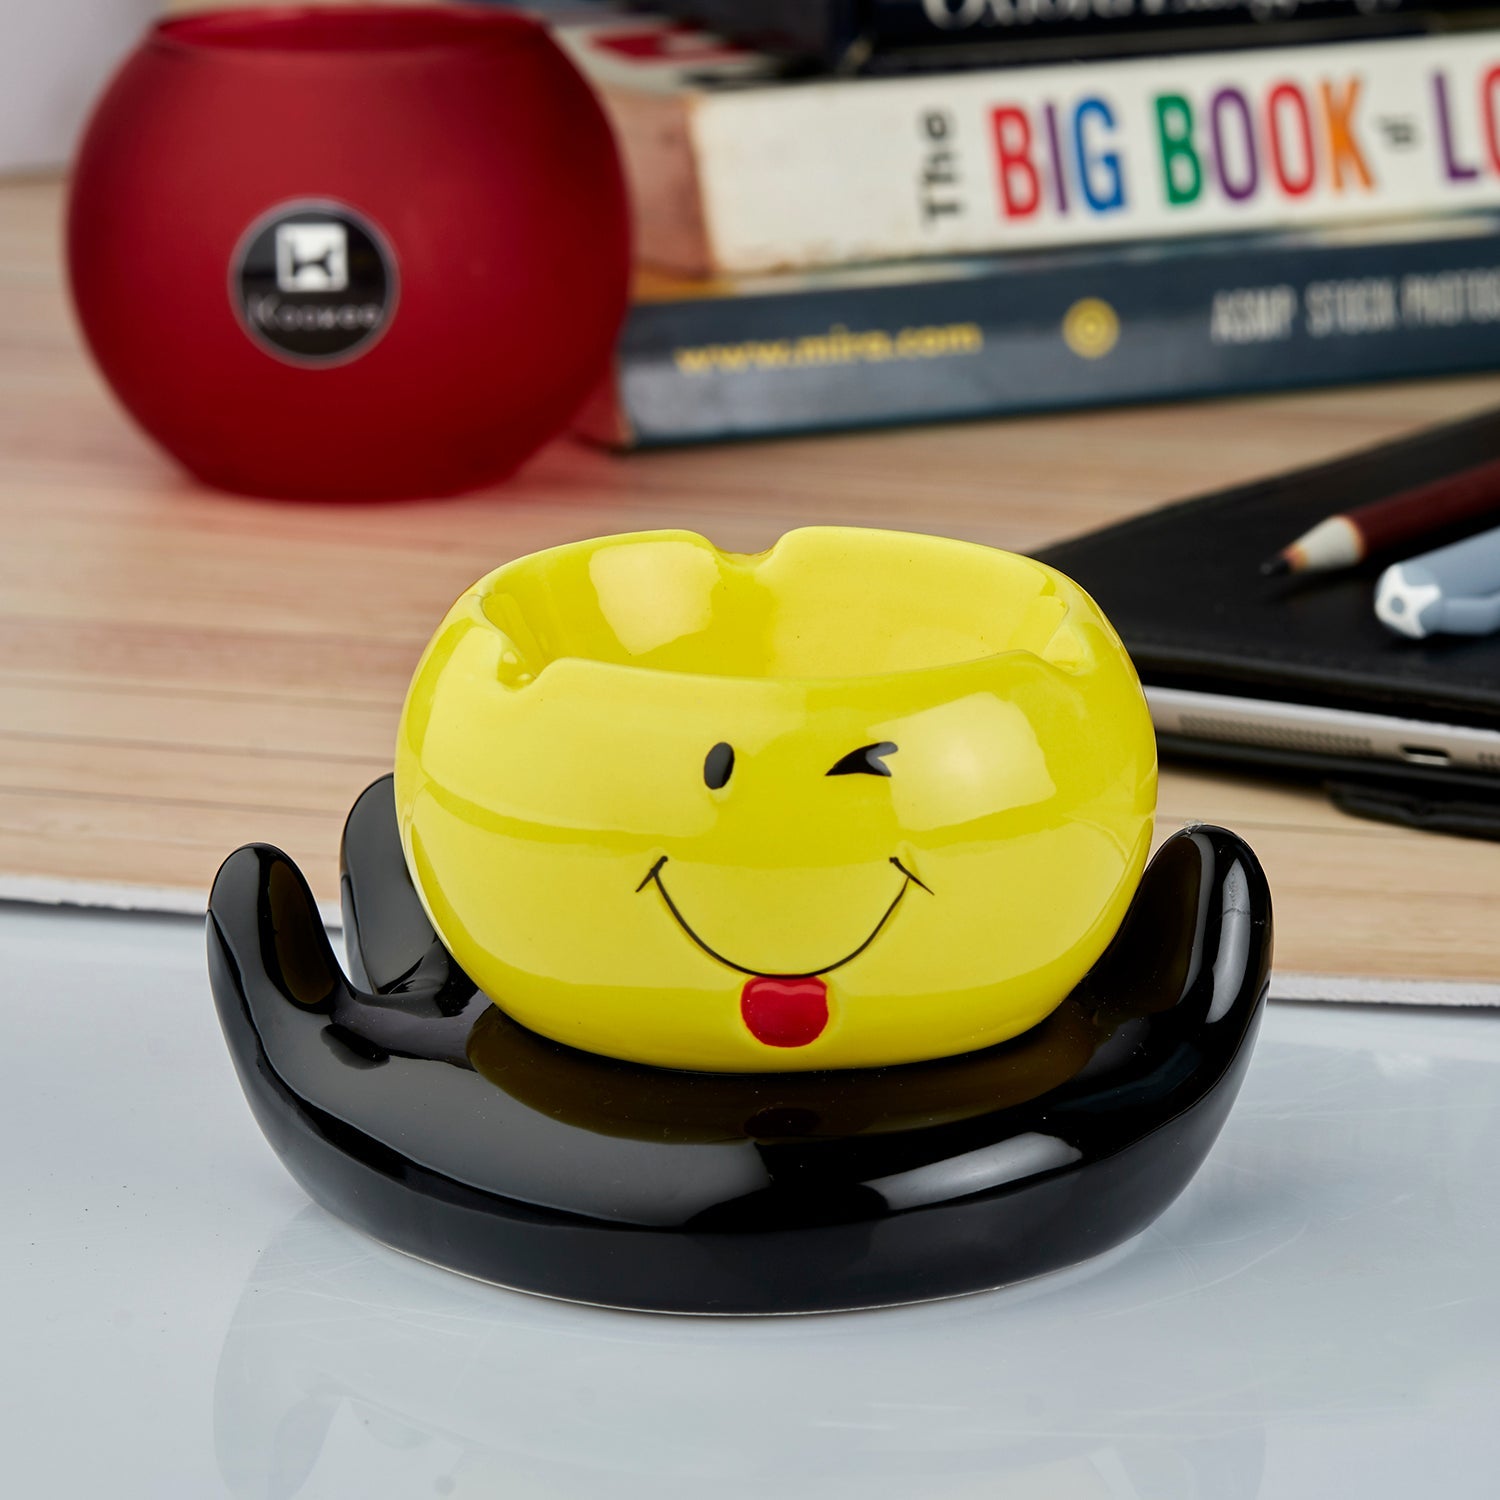 Kookee Groovy Ceramic Ashtray - Unique and Colorful Smoking Accessory with Retro Vibes - Funky Decor for Smokers and Collectors, Yellow/Black (10770)